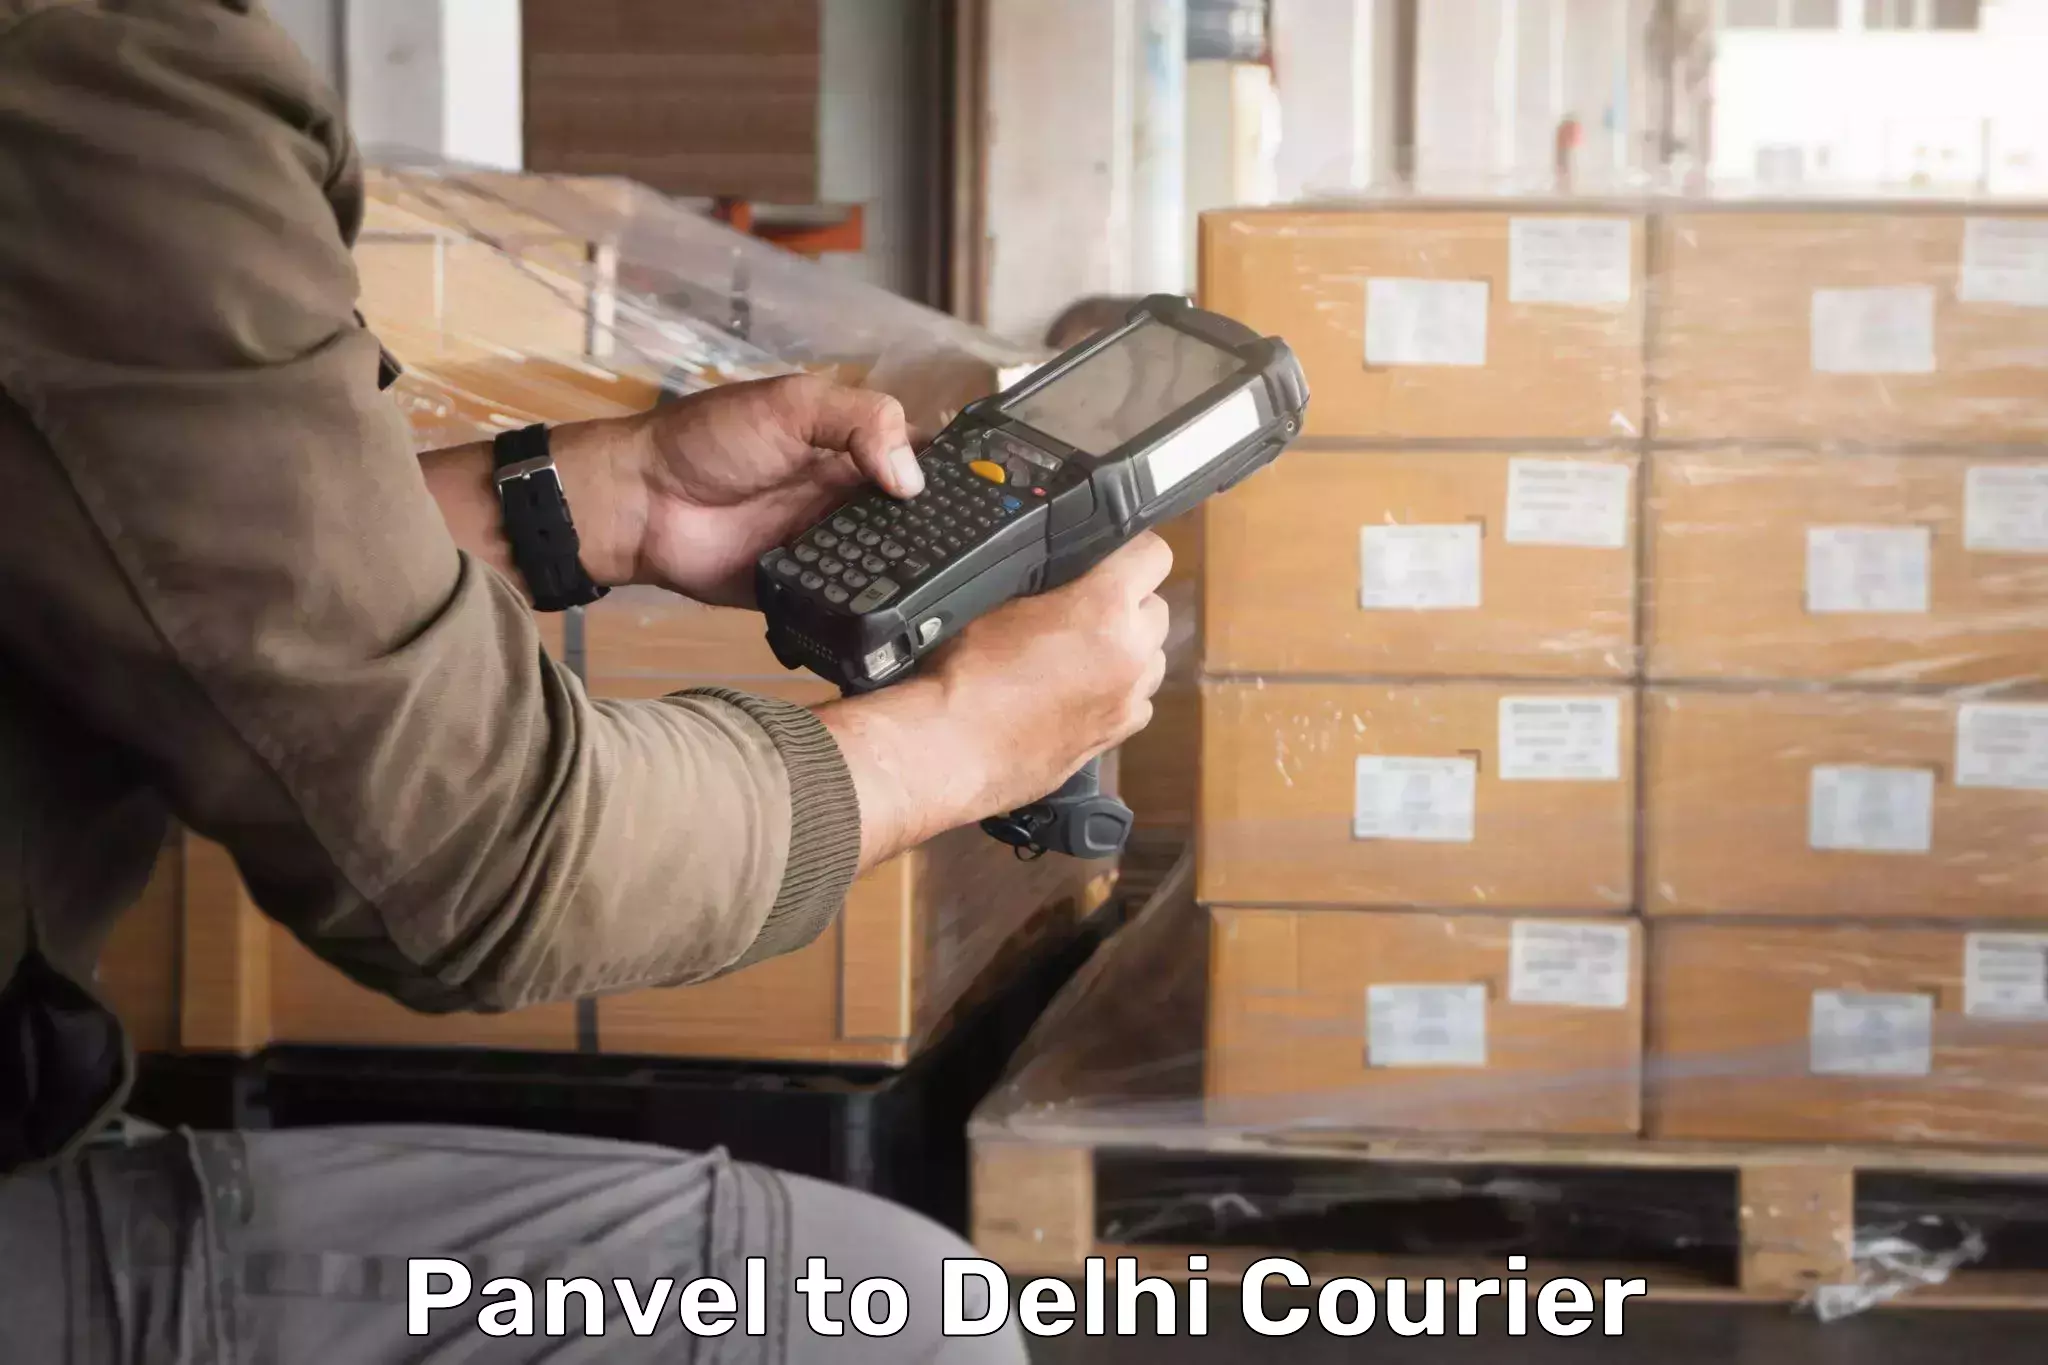 Reliable delivery network Panvel to Delhi